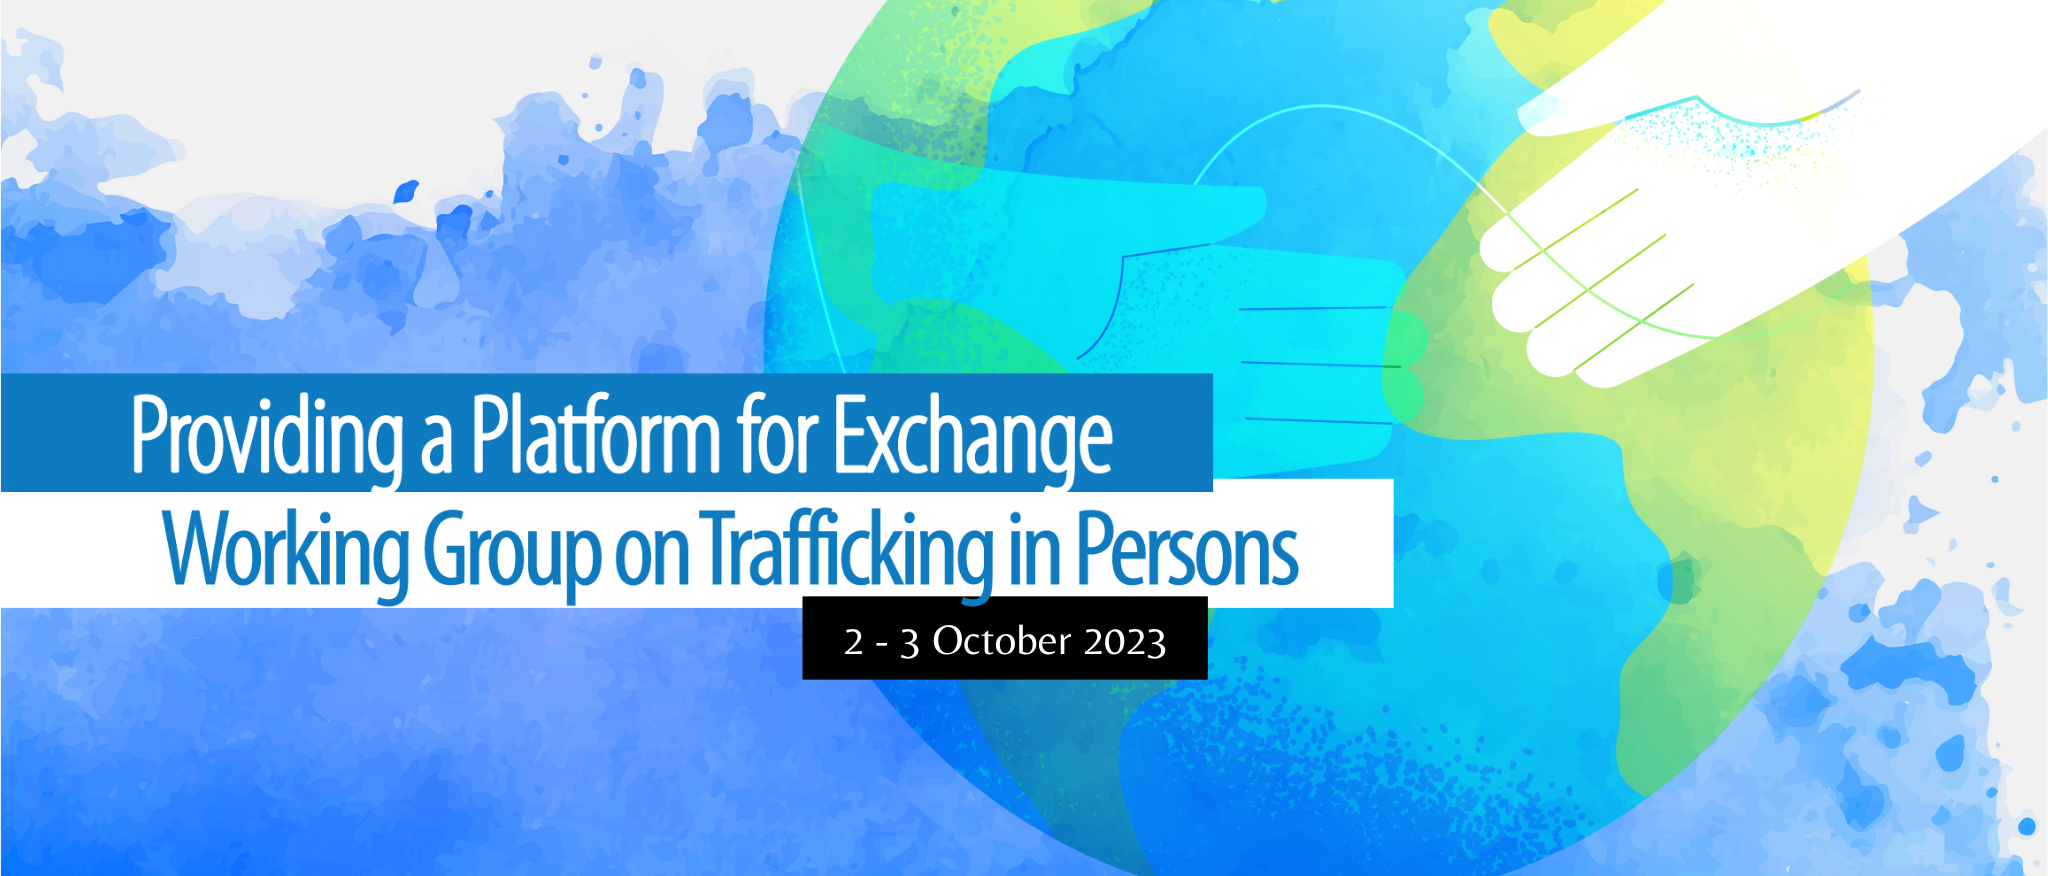 Working Group on Trafficking in Persons